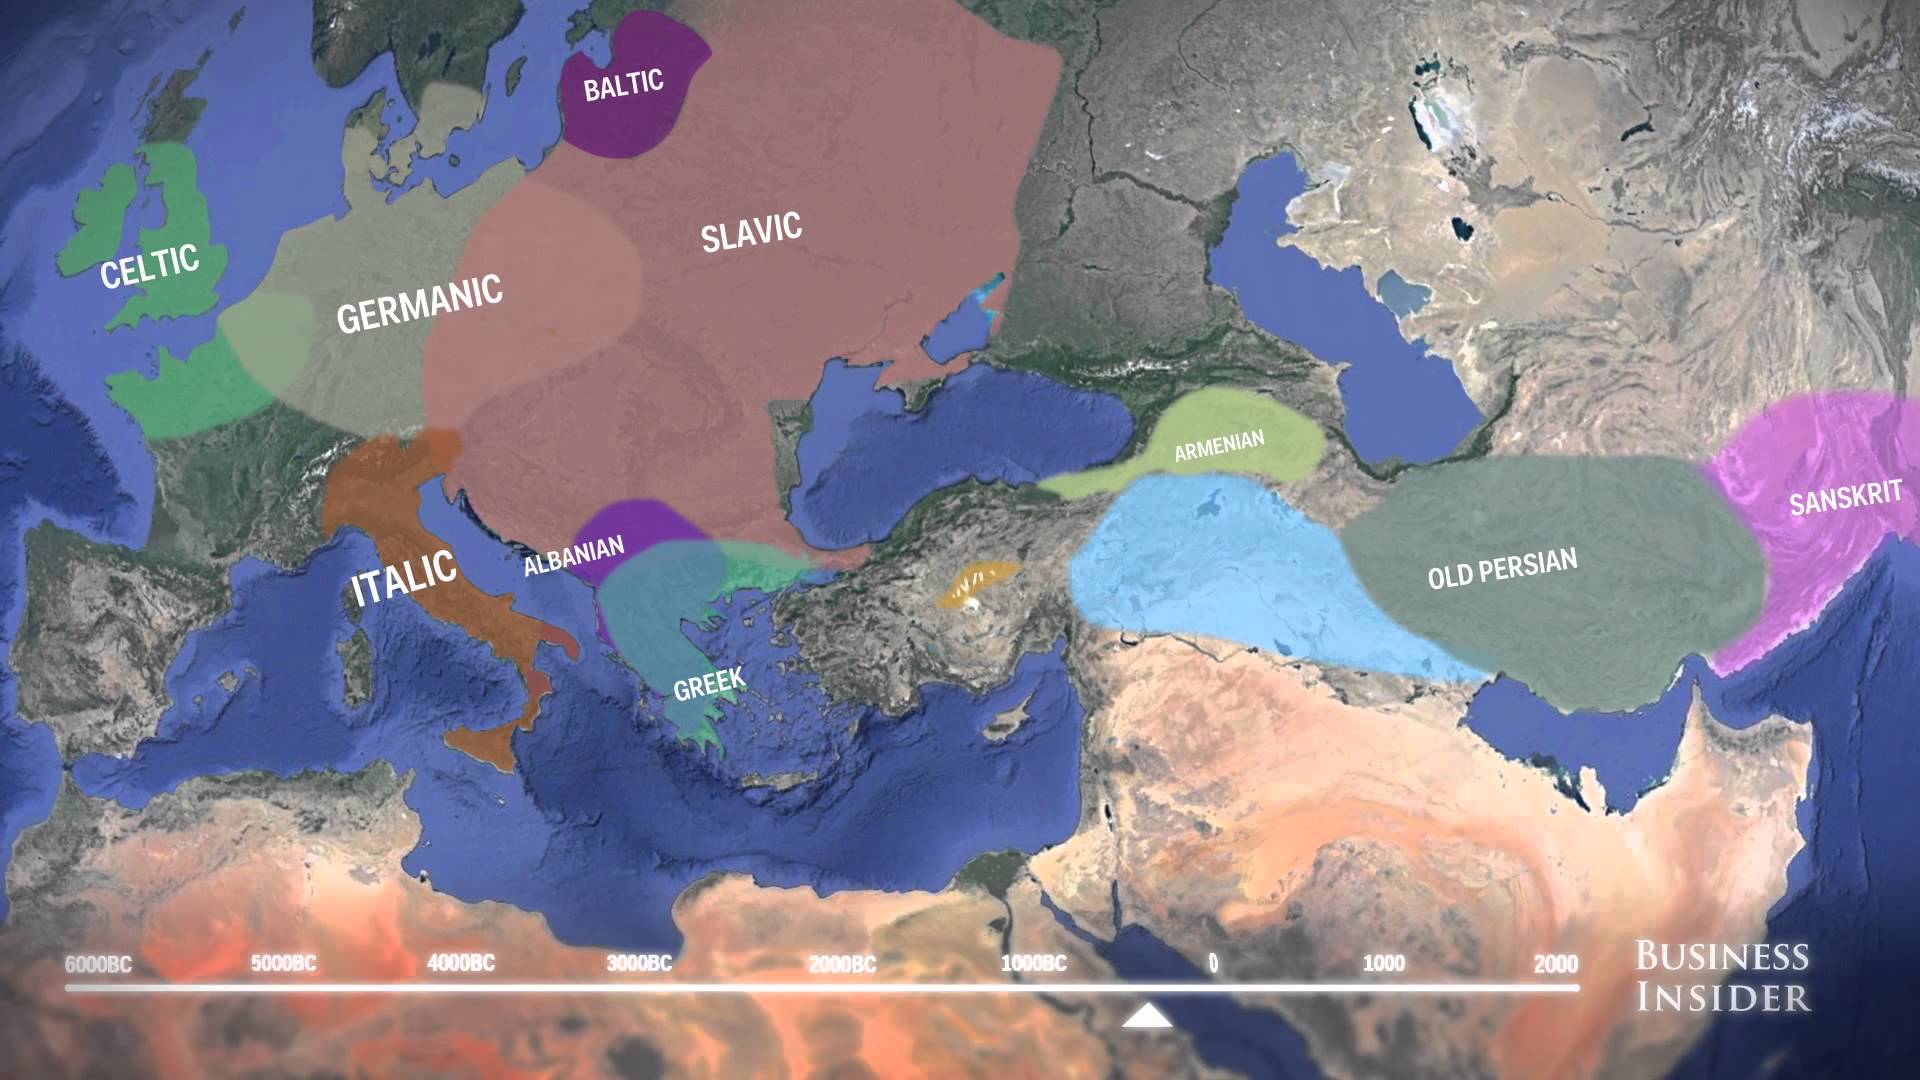 Animated map shows how Indo-European languages may have evolved